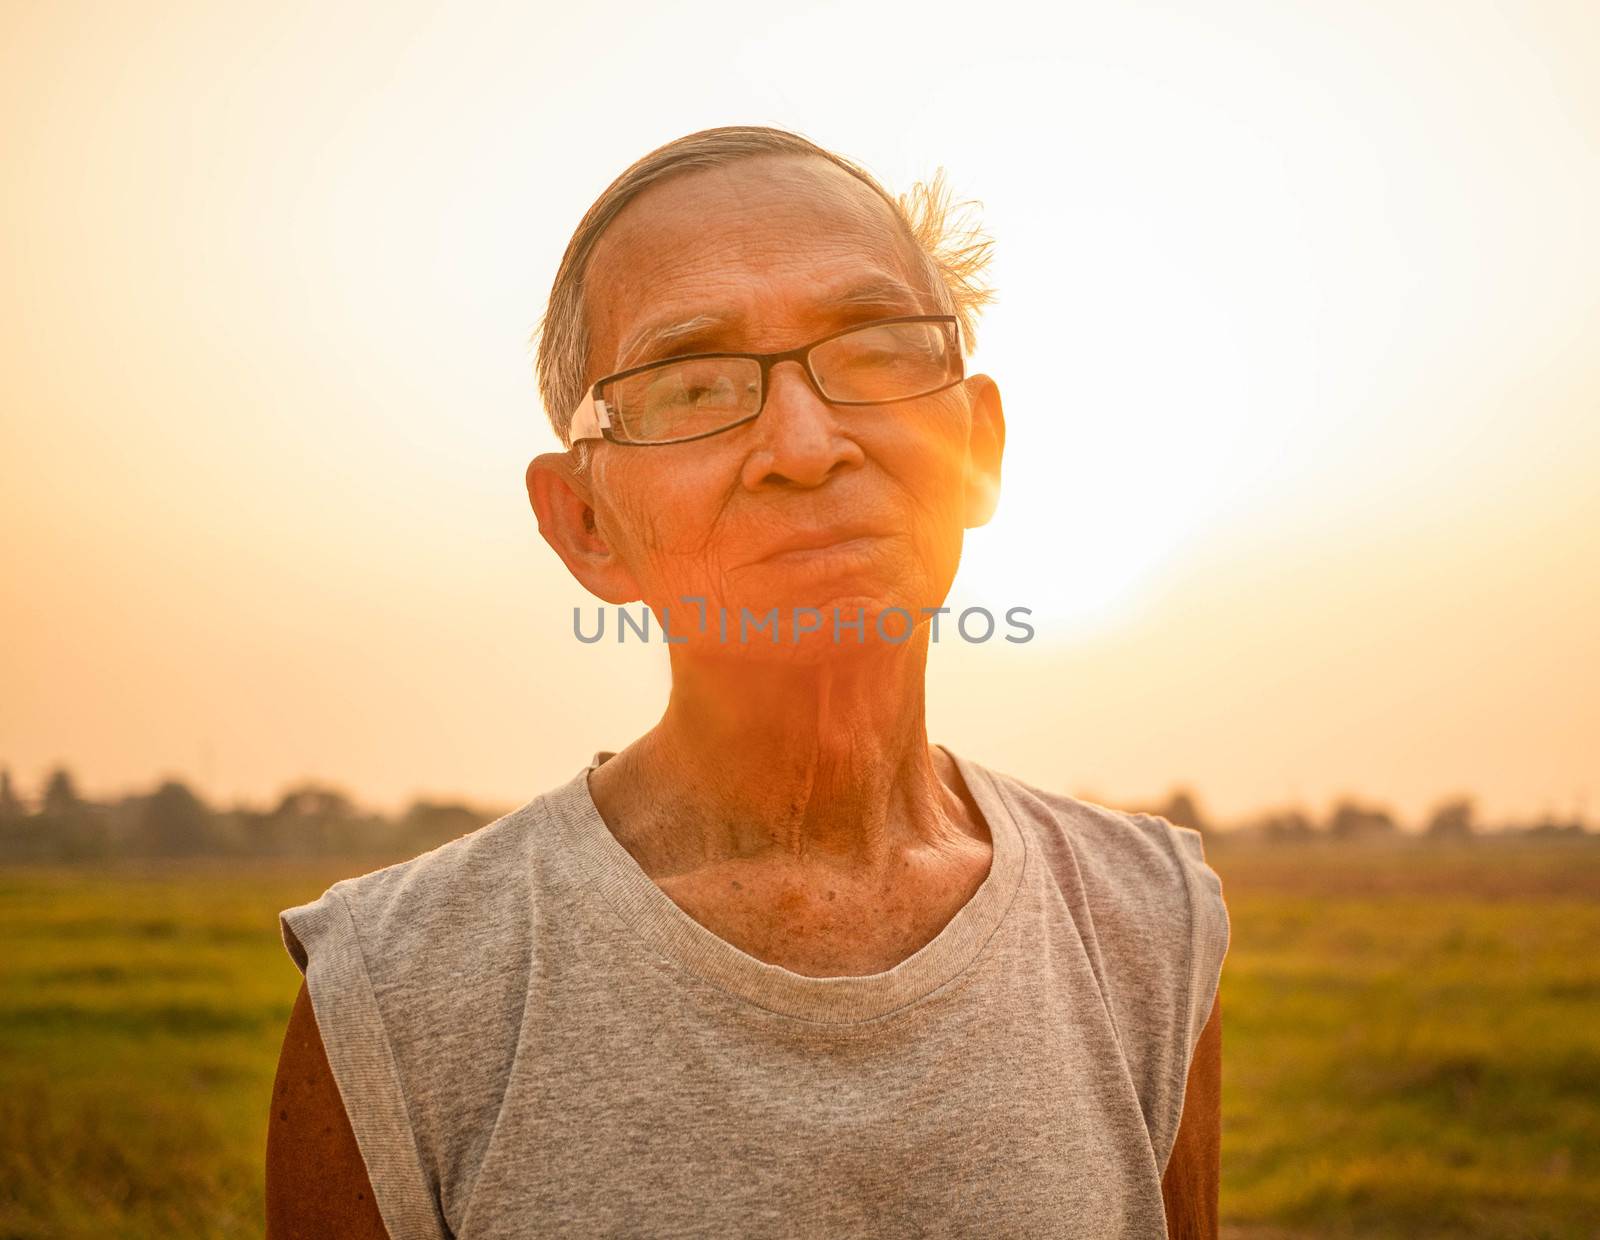 Asian senior man jogging on a sunset background over a field in countryside. Healthcare concept. by TEERASAK